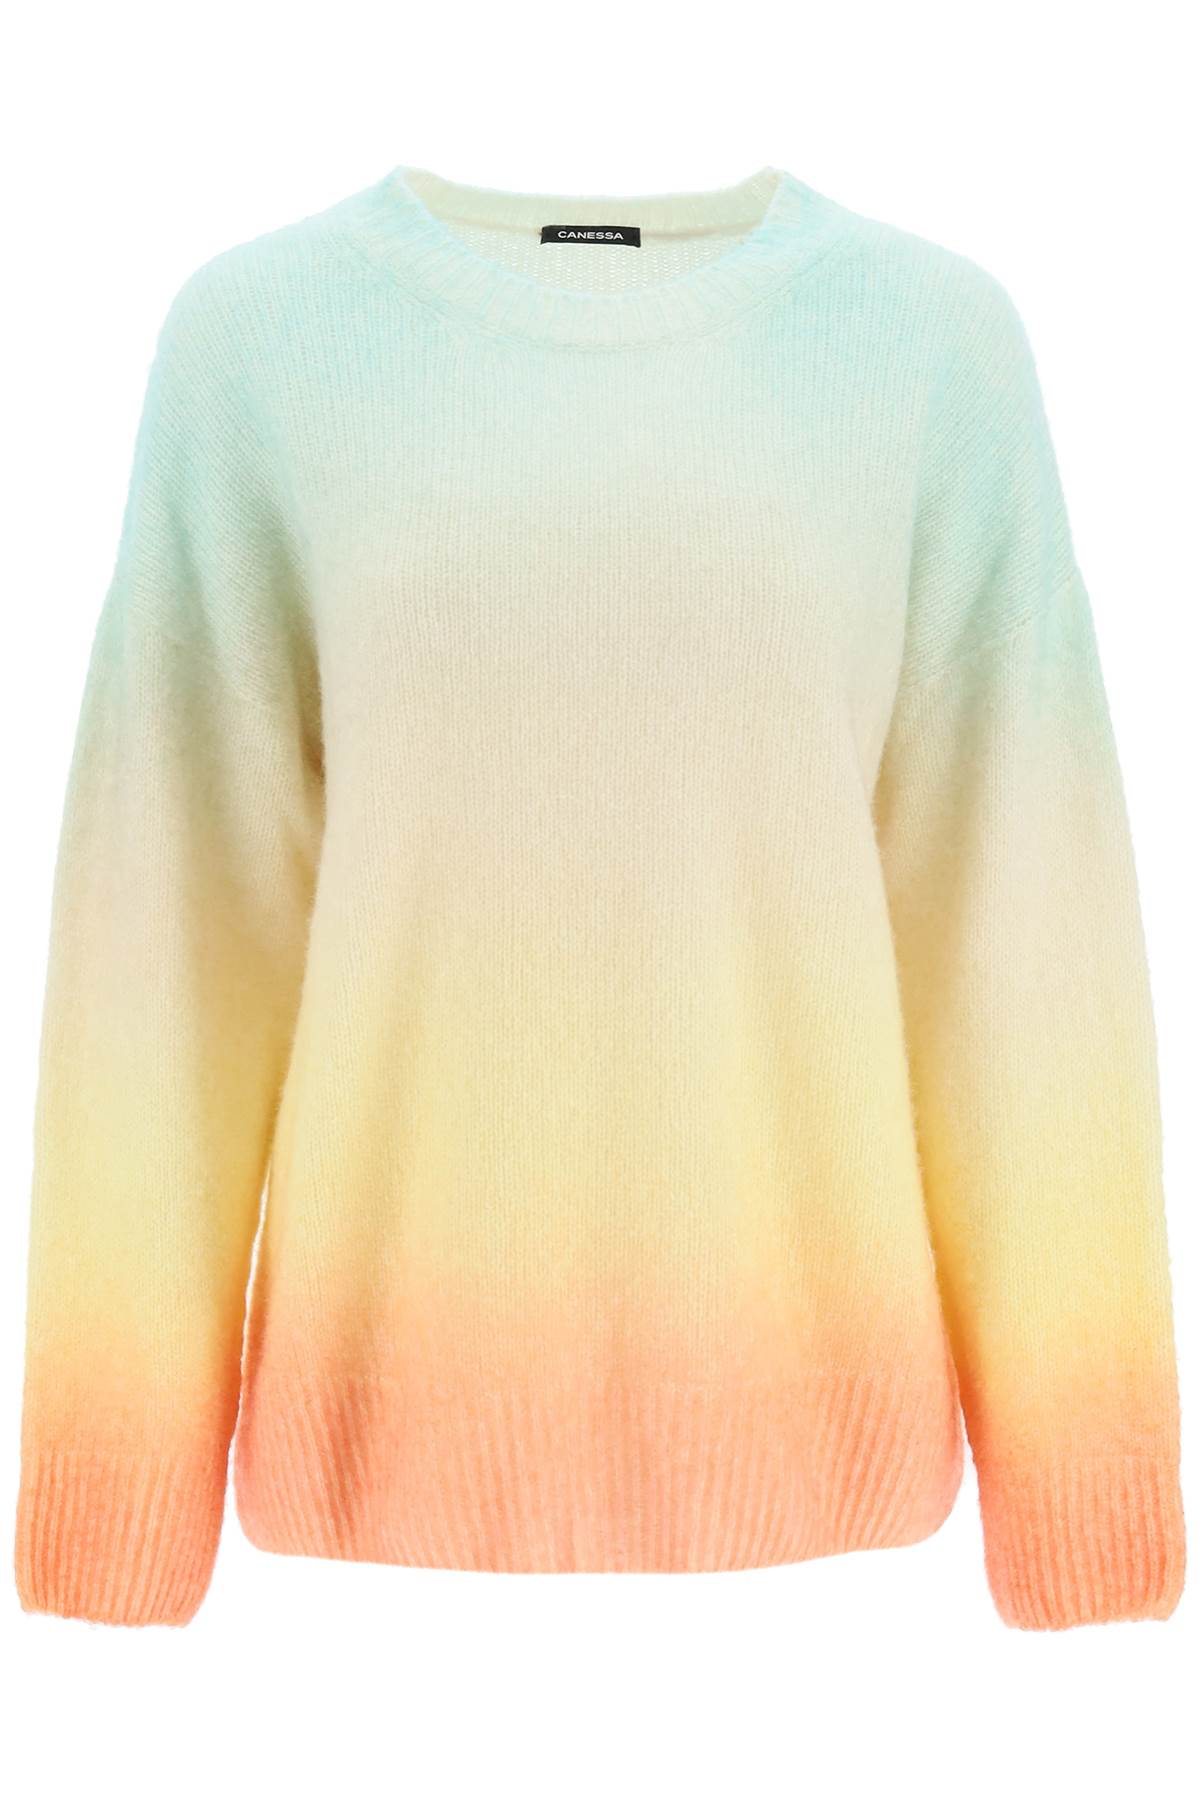 Canessa clelia Cashmere And Silk Sweater With Gradient Print